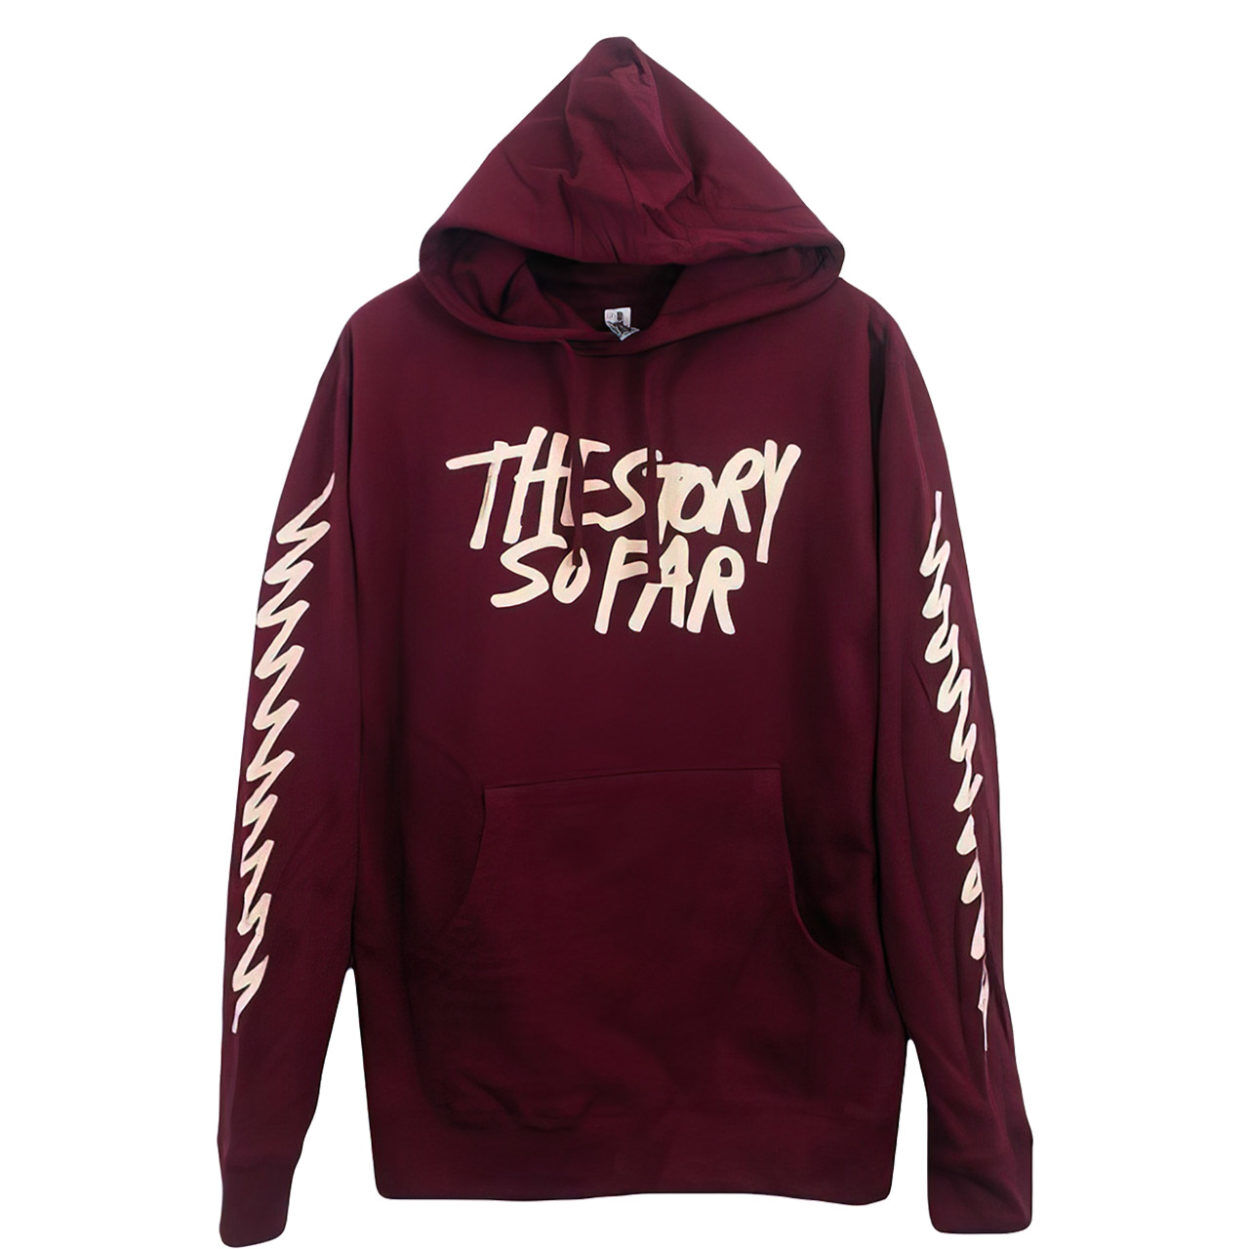 THE STORY SO FAR Eye Pullover Hoodie